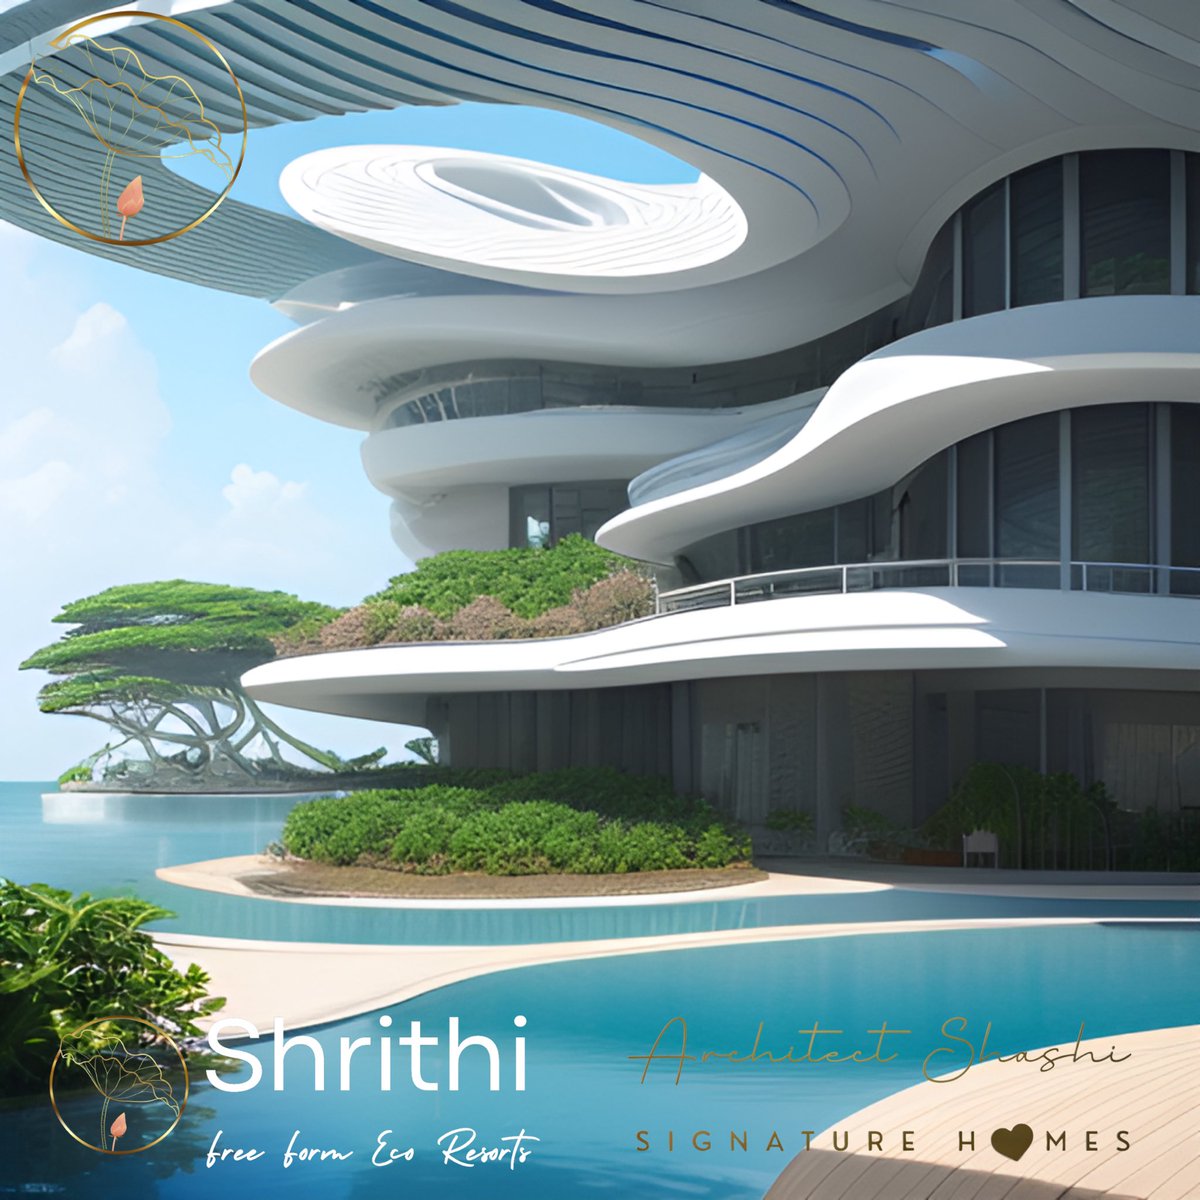 Architecture inspired by ocean waves. 

There is immense inspiration in ocean. 

#curvedarchitecture 

#beachresort #ecoresort #highendhomes #hotels and resorts #resortdesign #aiarchitecture #designthinking #designlove #resort #resortstyleliving #luxuryhomes #luxury-design